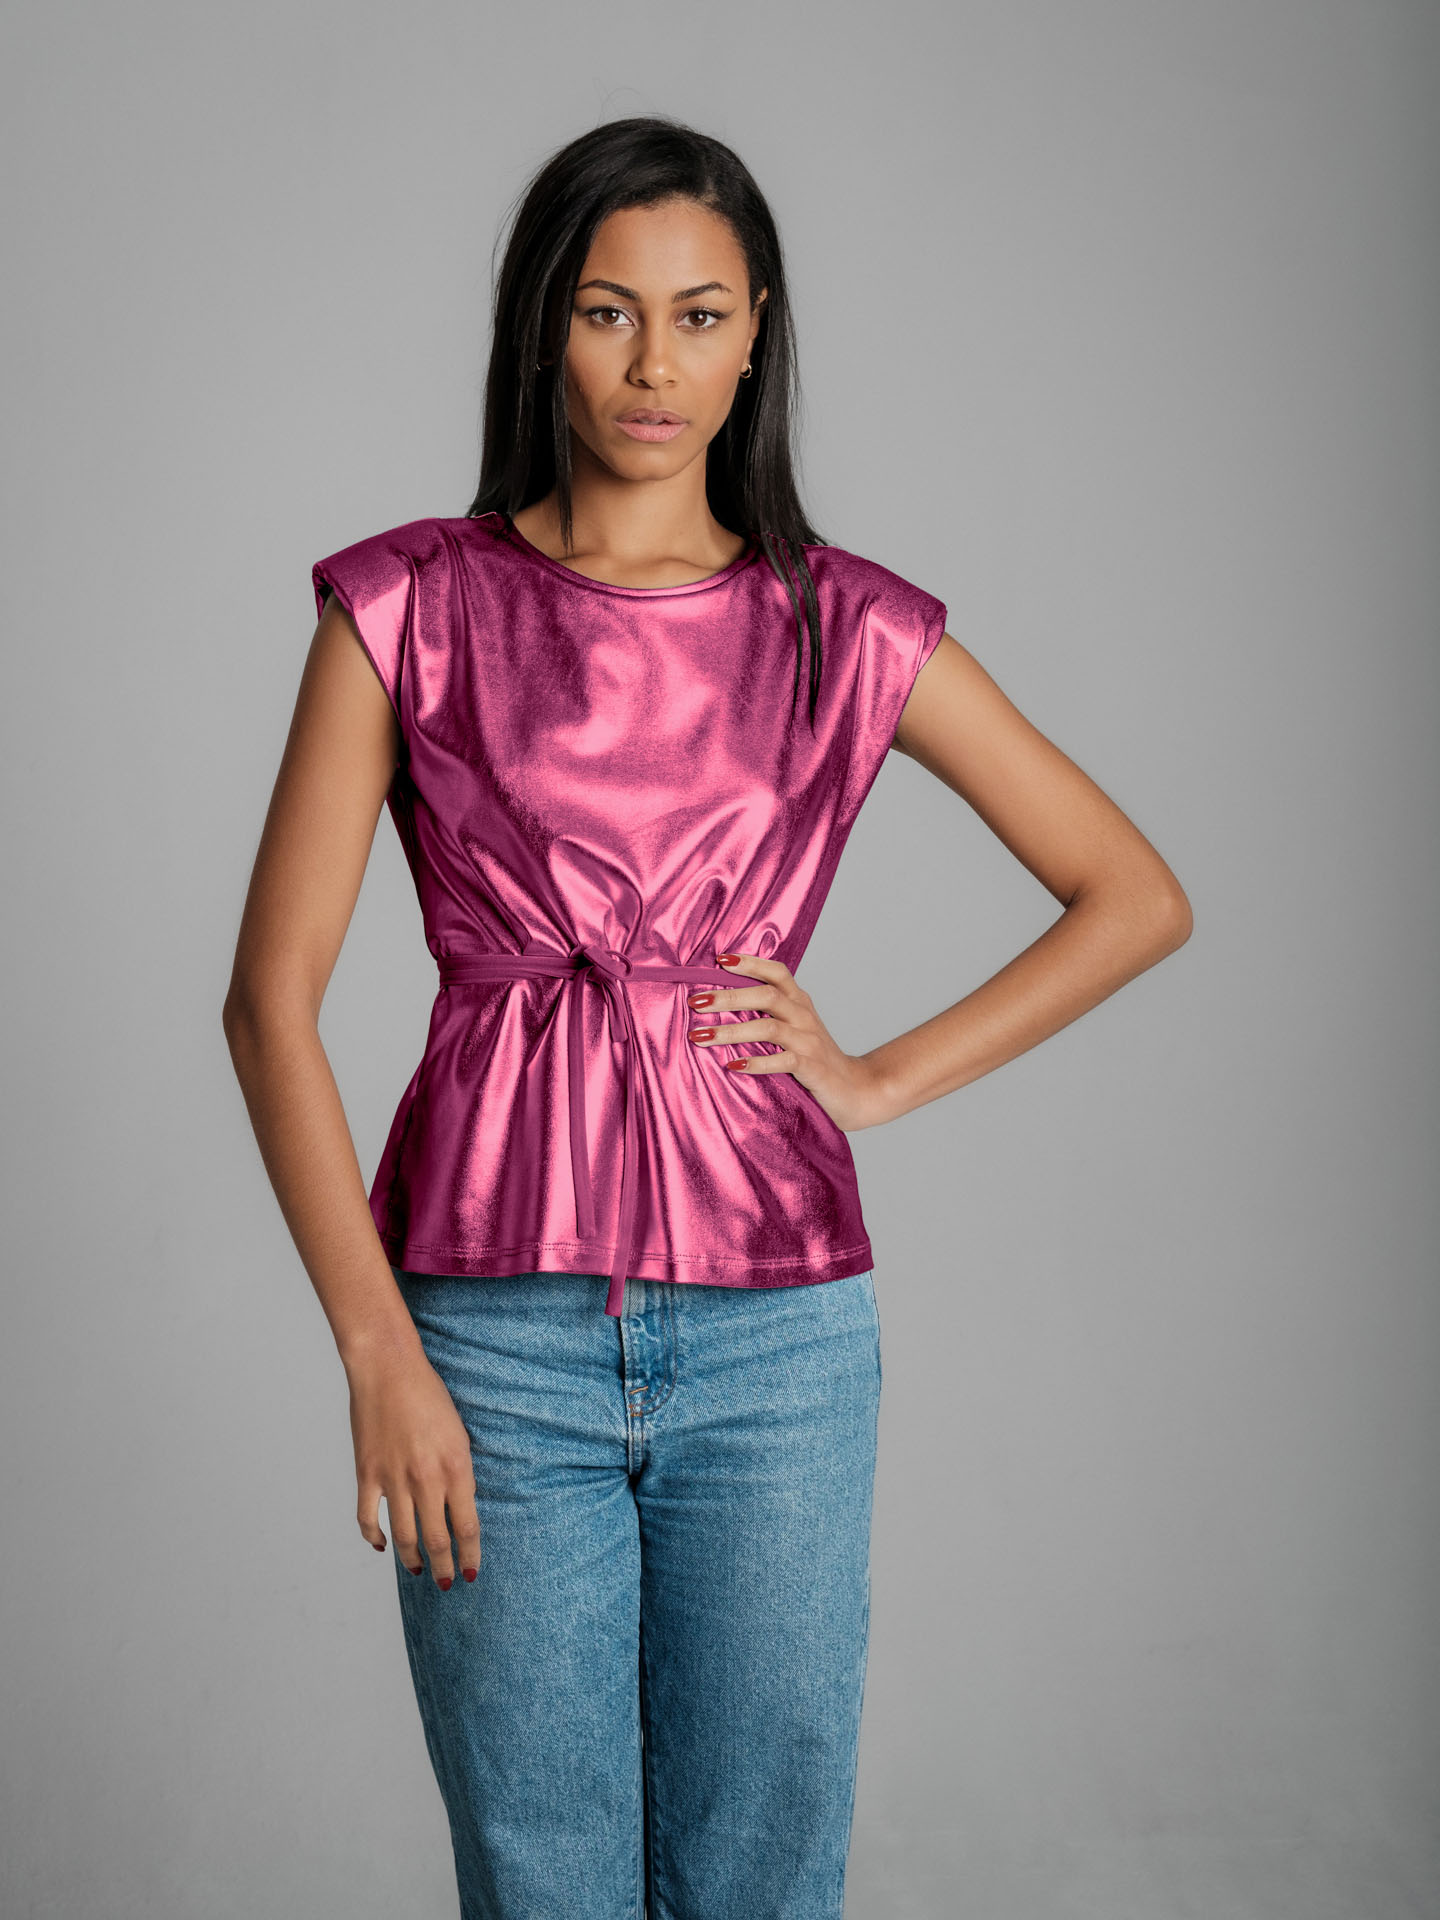 Bowie glam pink I Top